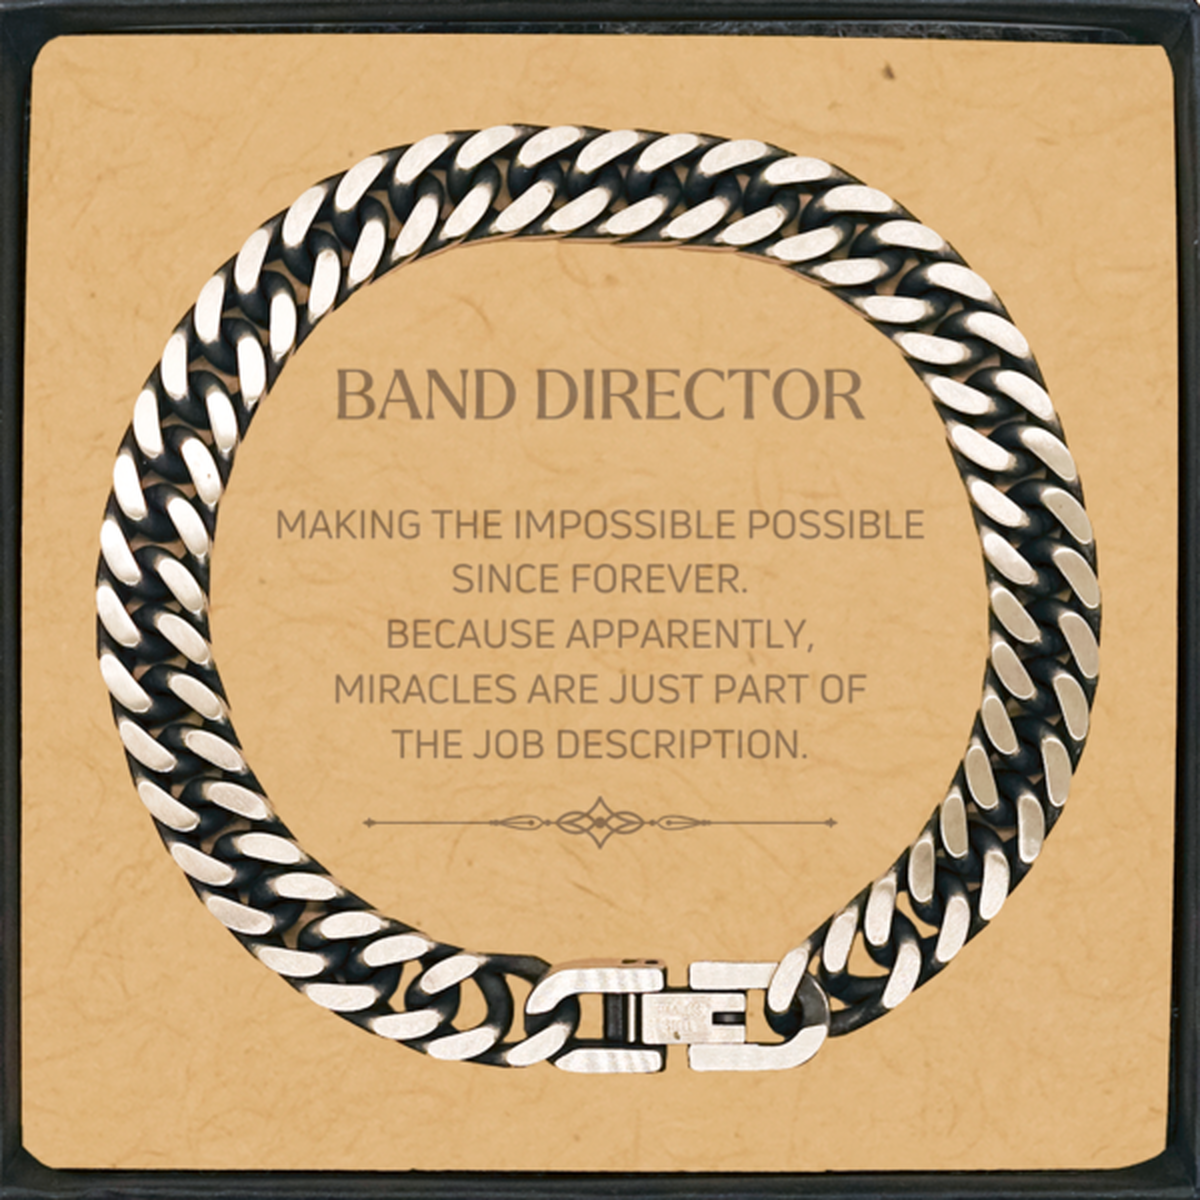 Funny Band Director Gifts, Miracles are just part of the job description, Inspirational Birthday Cuban Link Chain Bracelet For Band Director, Men, Women, Coworkers, Friends, Boss